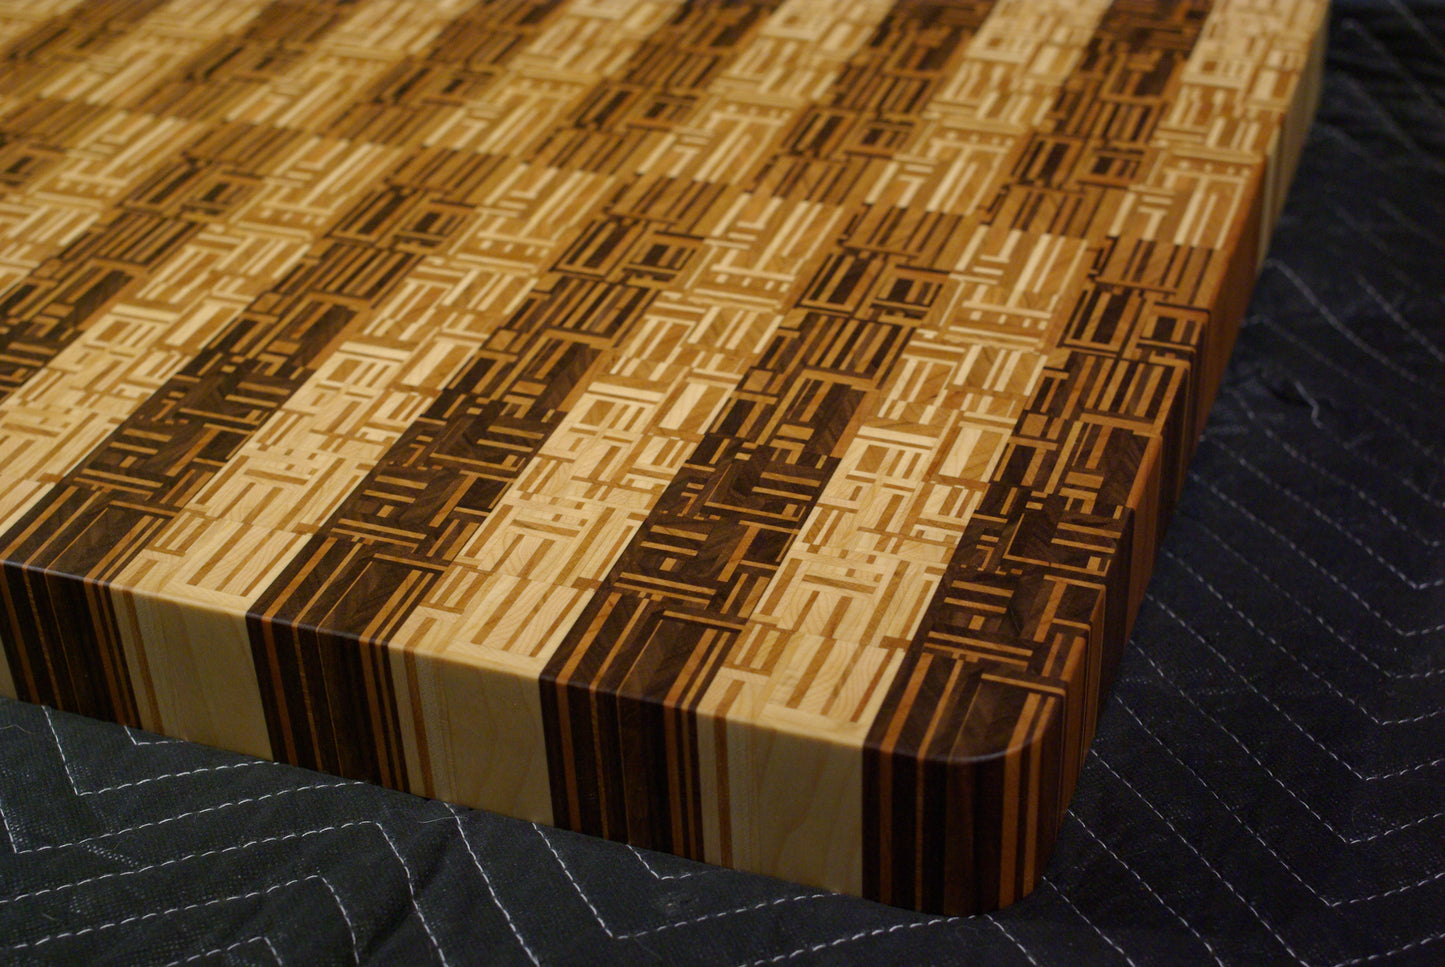 Maple, Walnut and Cherry Patterned Board